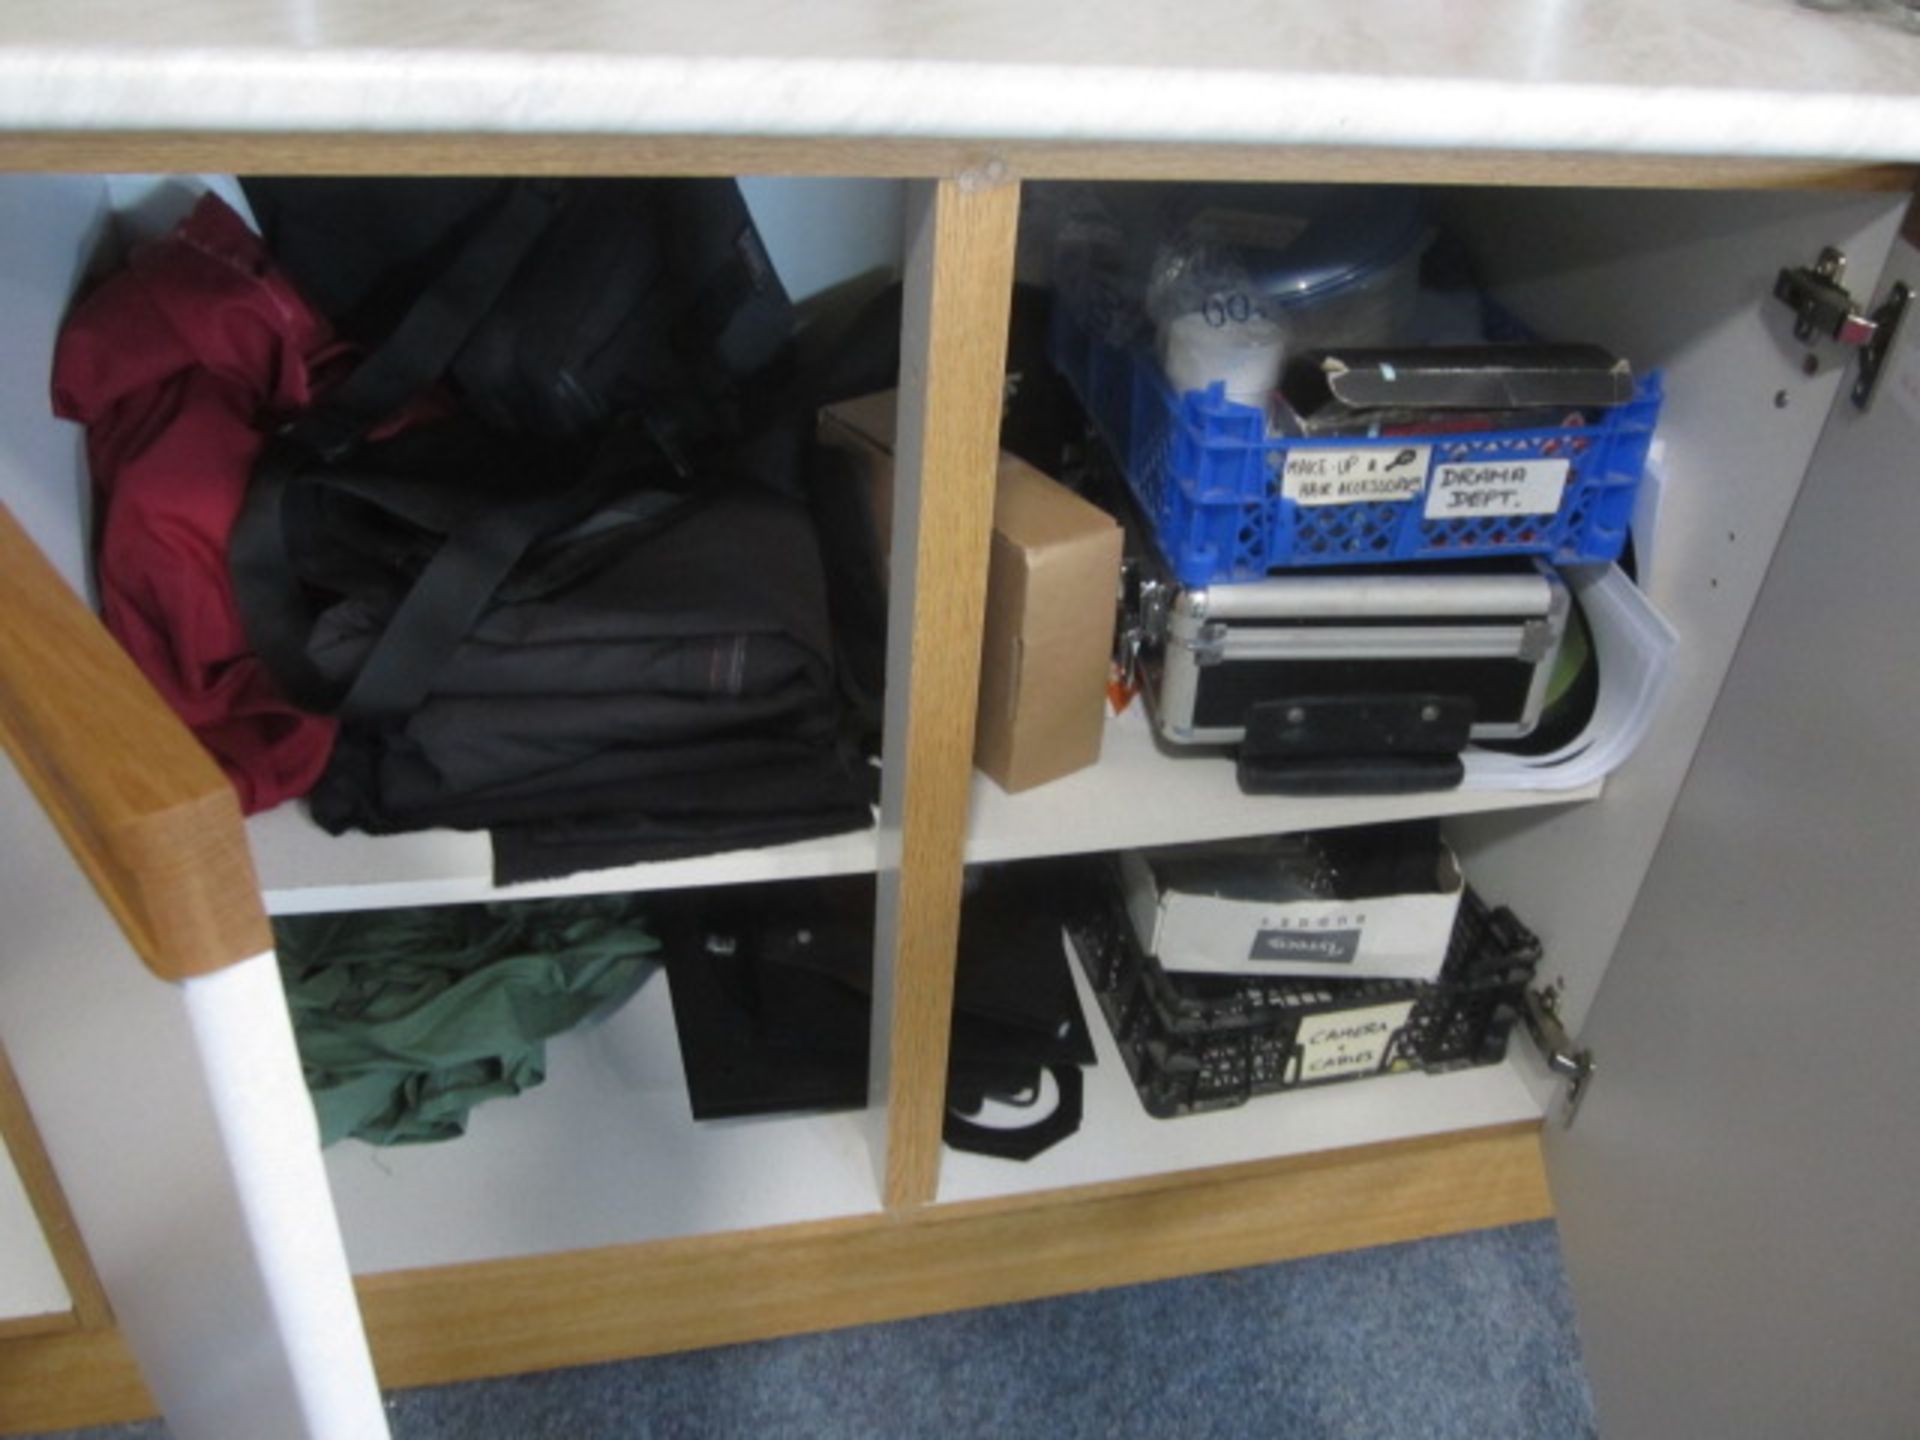 Remaining loose contents of room including dressing up costumes, hair accessories, DVD's, books, - Image 4 of 11